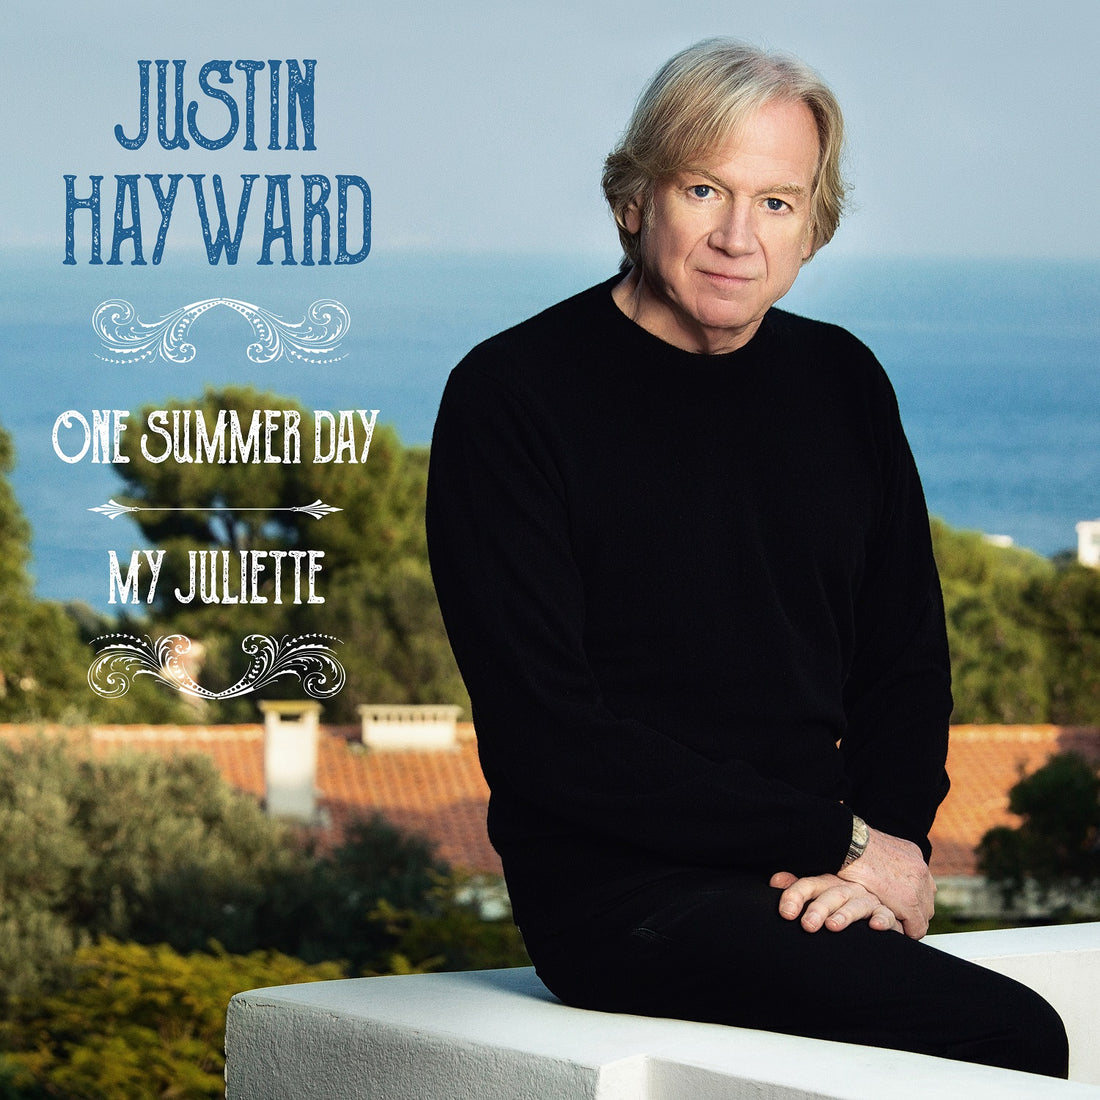 Justin Hayward - One Summer Day / My Juliette - New 2 Song EP Available